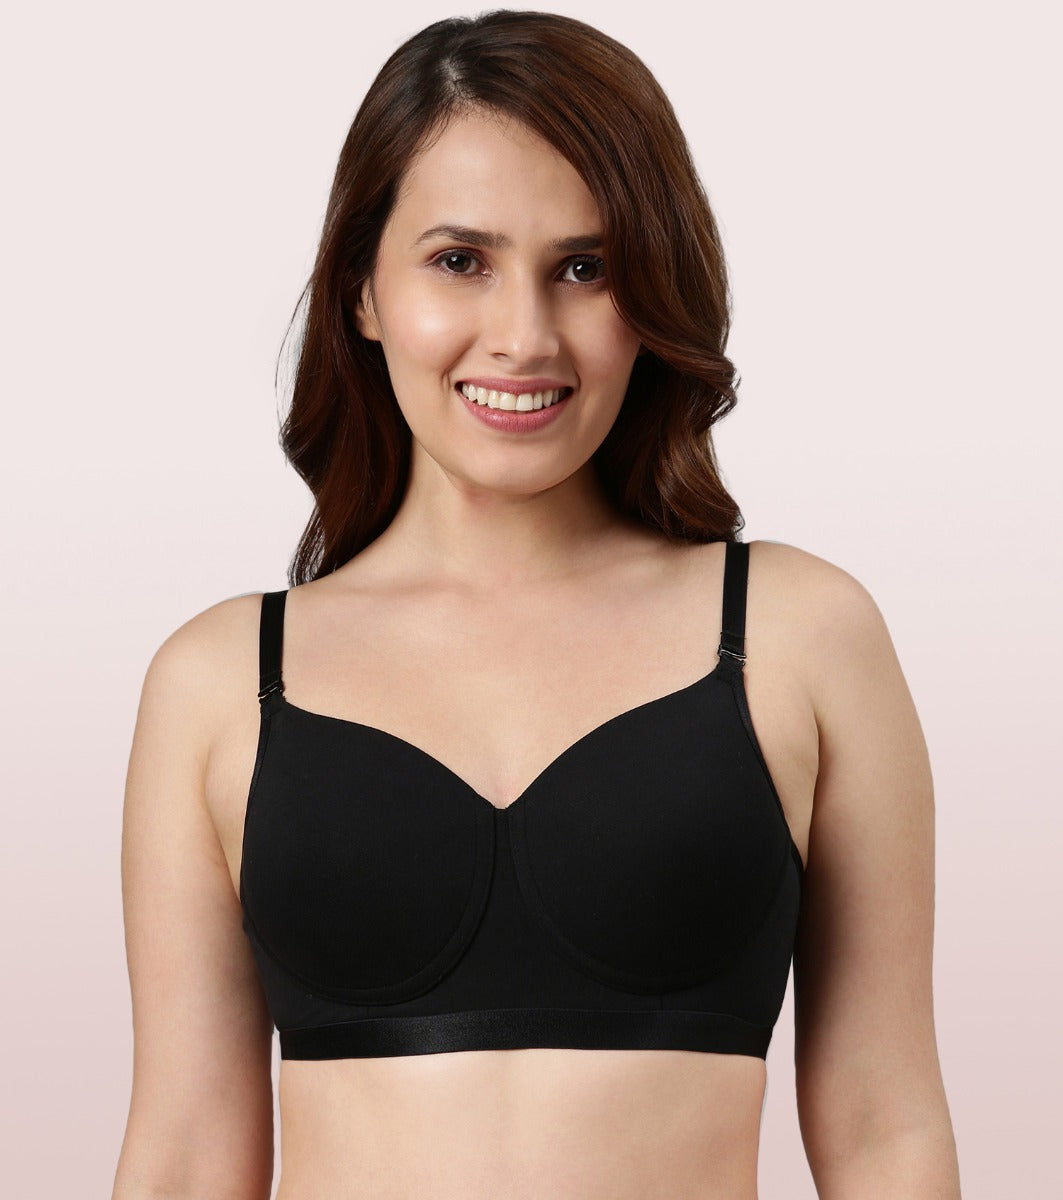 Enamor Fab-Cool A165 Antimicrobial Ultimate Coverage Cotton T-shirt Bra for Women- High Coverage, Padded and Wirefree - Black